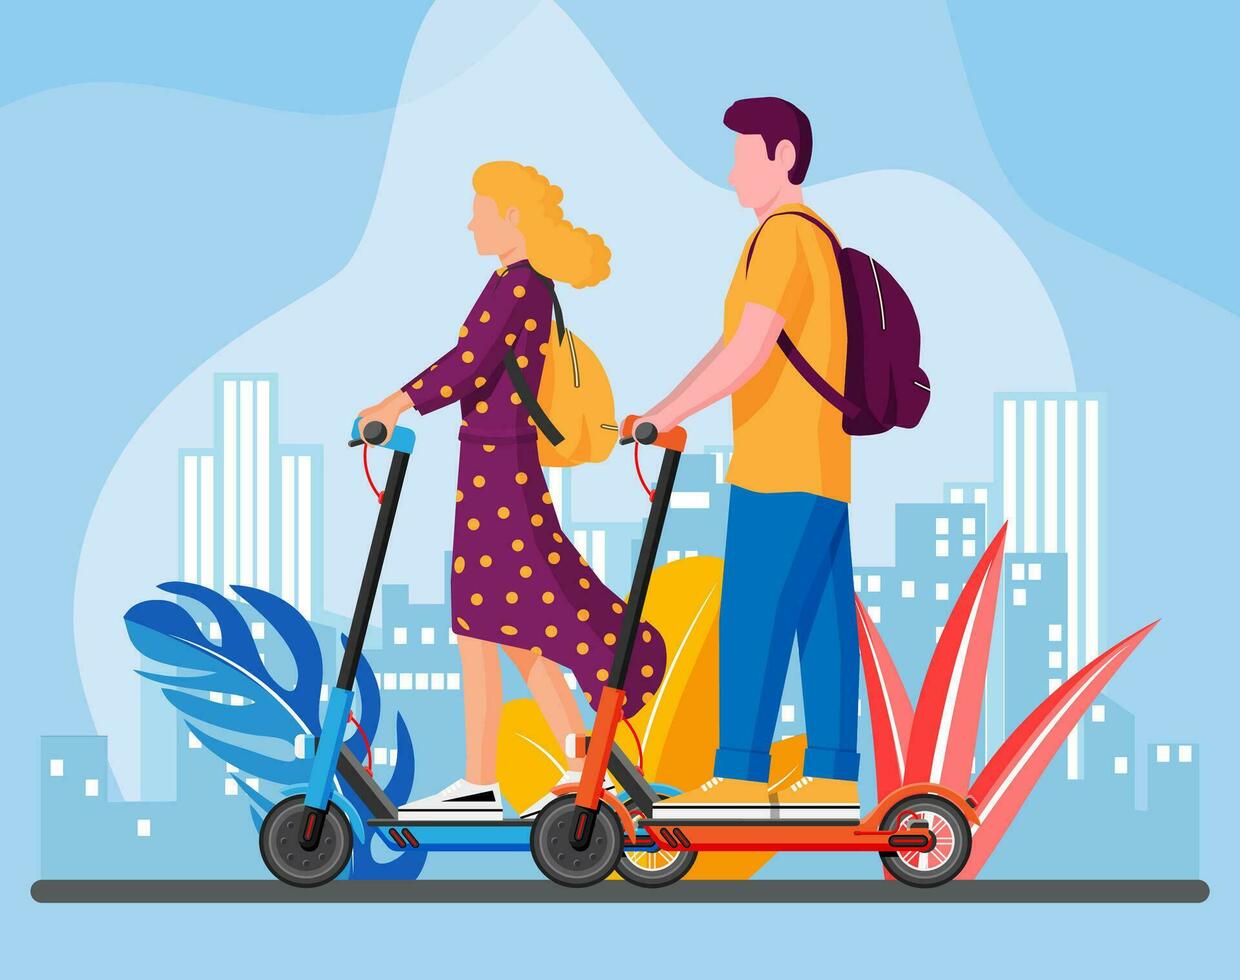 Young woman and man on kick scooter. Girl and guy with backpack rolling on electric scooter. Hipster character uses modern urban transport. Ecological city transportation. Flat vector illustration